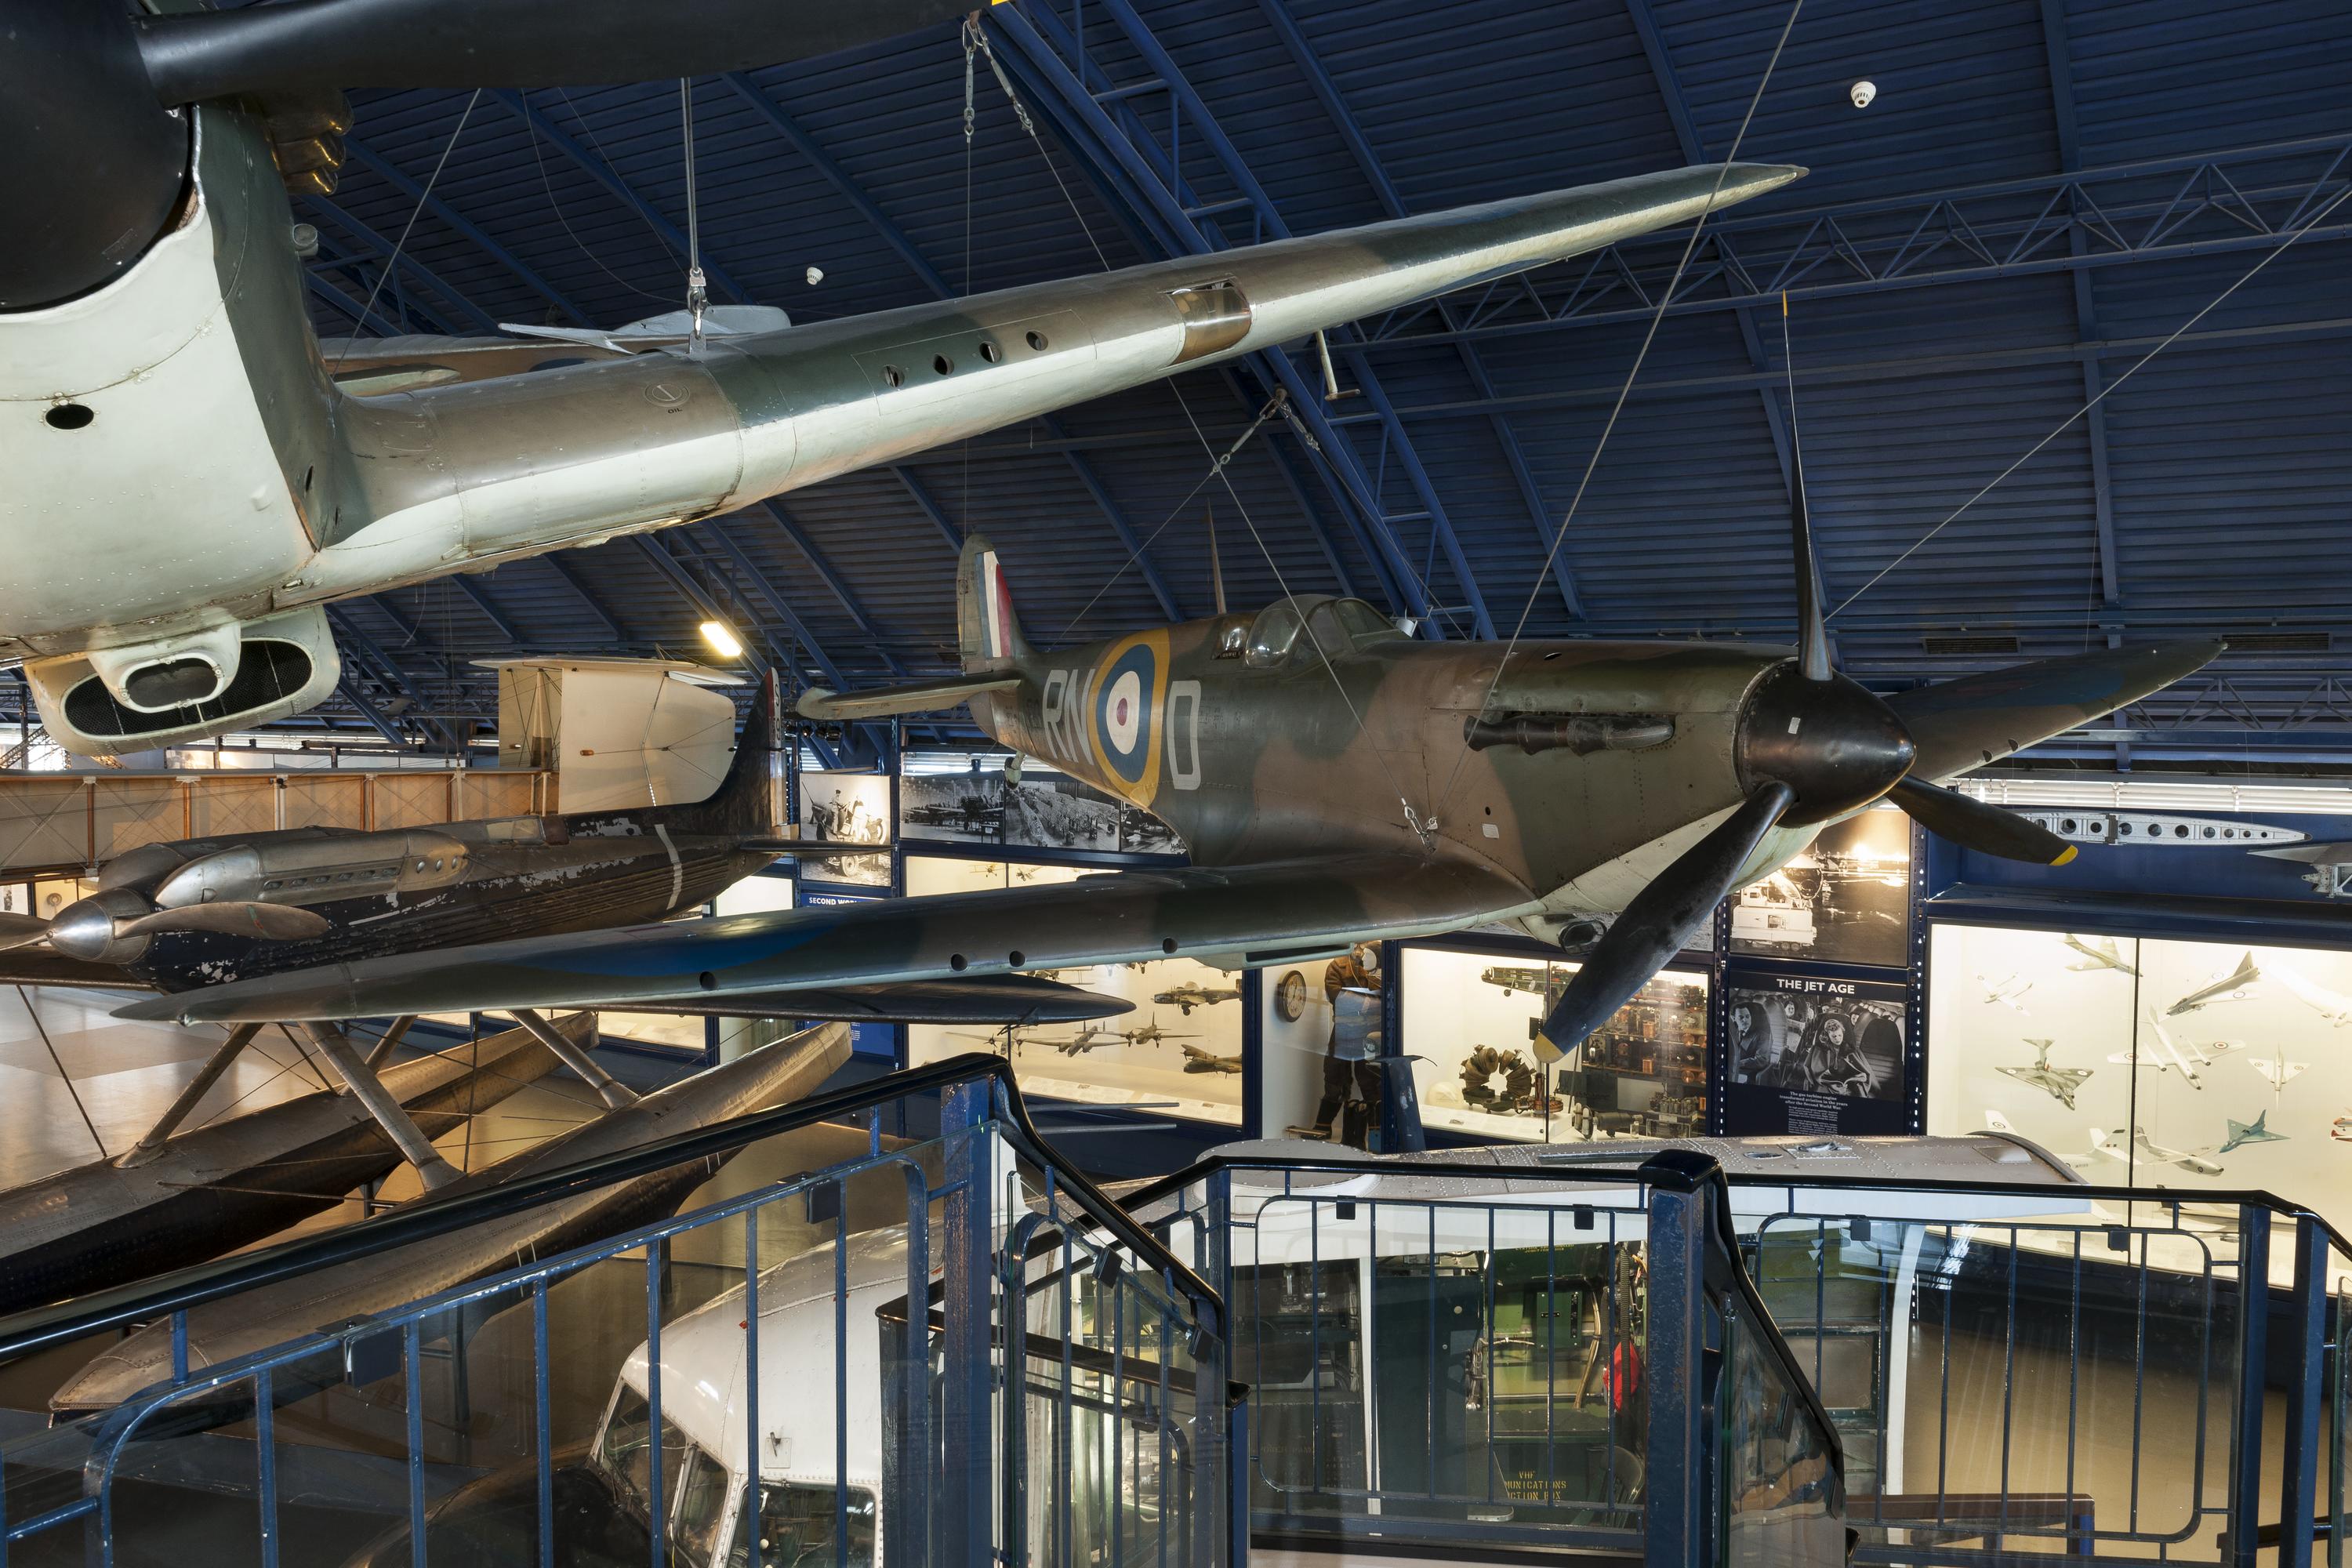 Vickers-Supermarine Mk1 Spitfire, No. 9444, (centre) with part of Hawker Hurricane pictured on display in the Flight Gallery